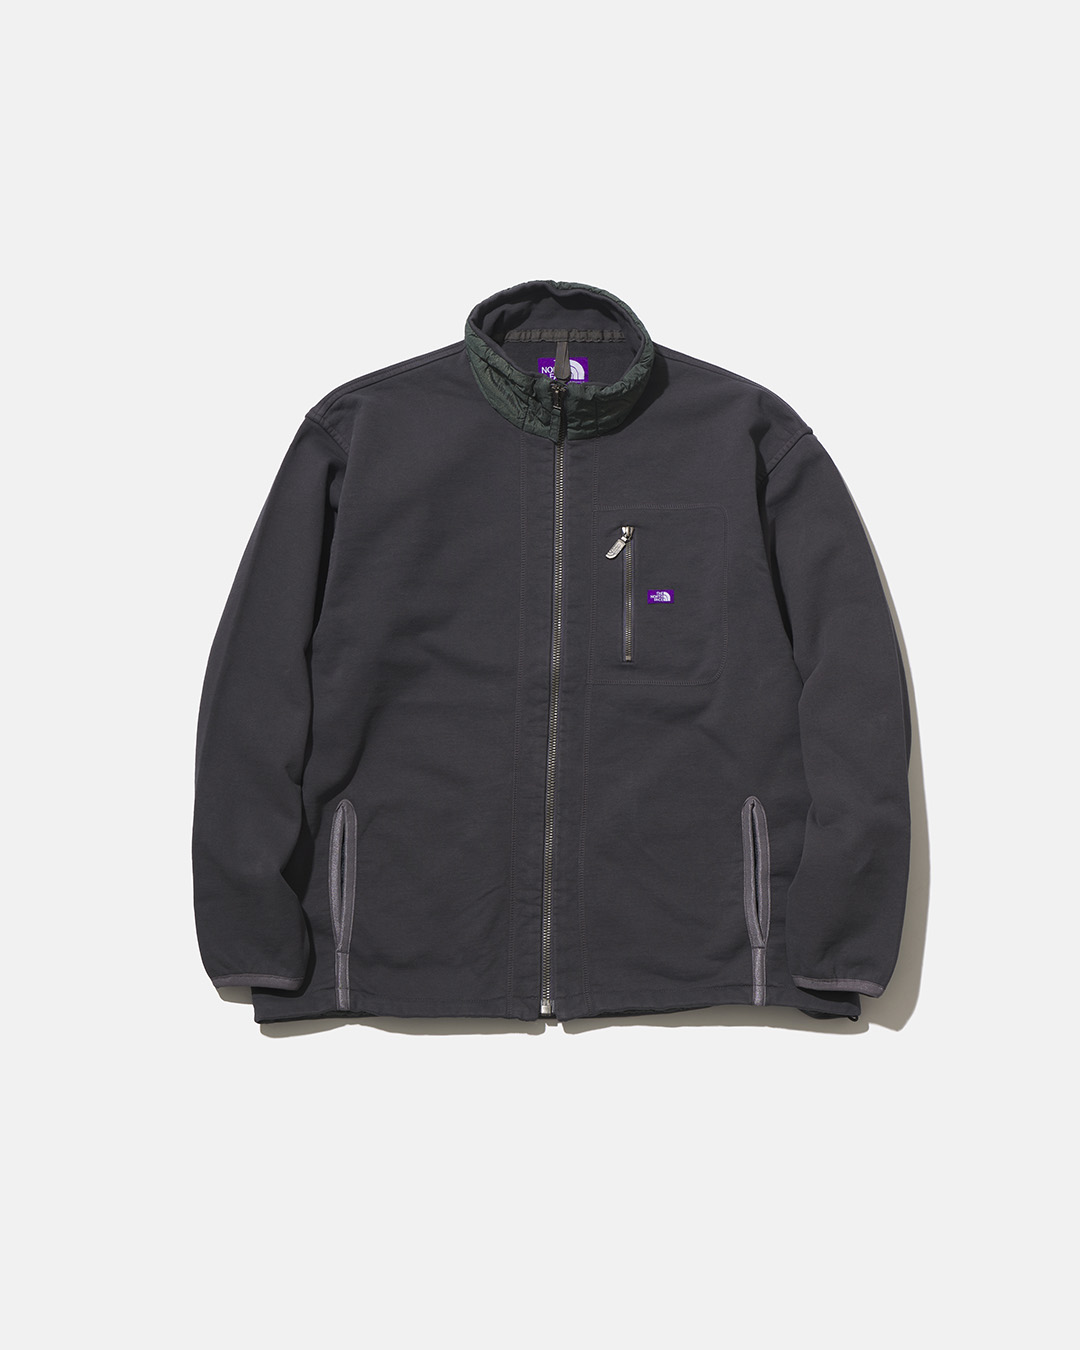 nanamica / THE NORTH FACE PURPLE LABEL / Featured Product vol.25